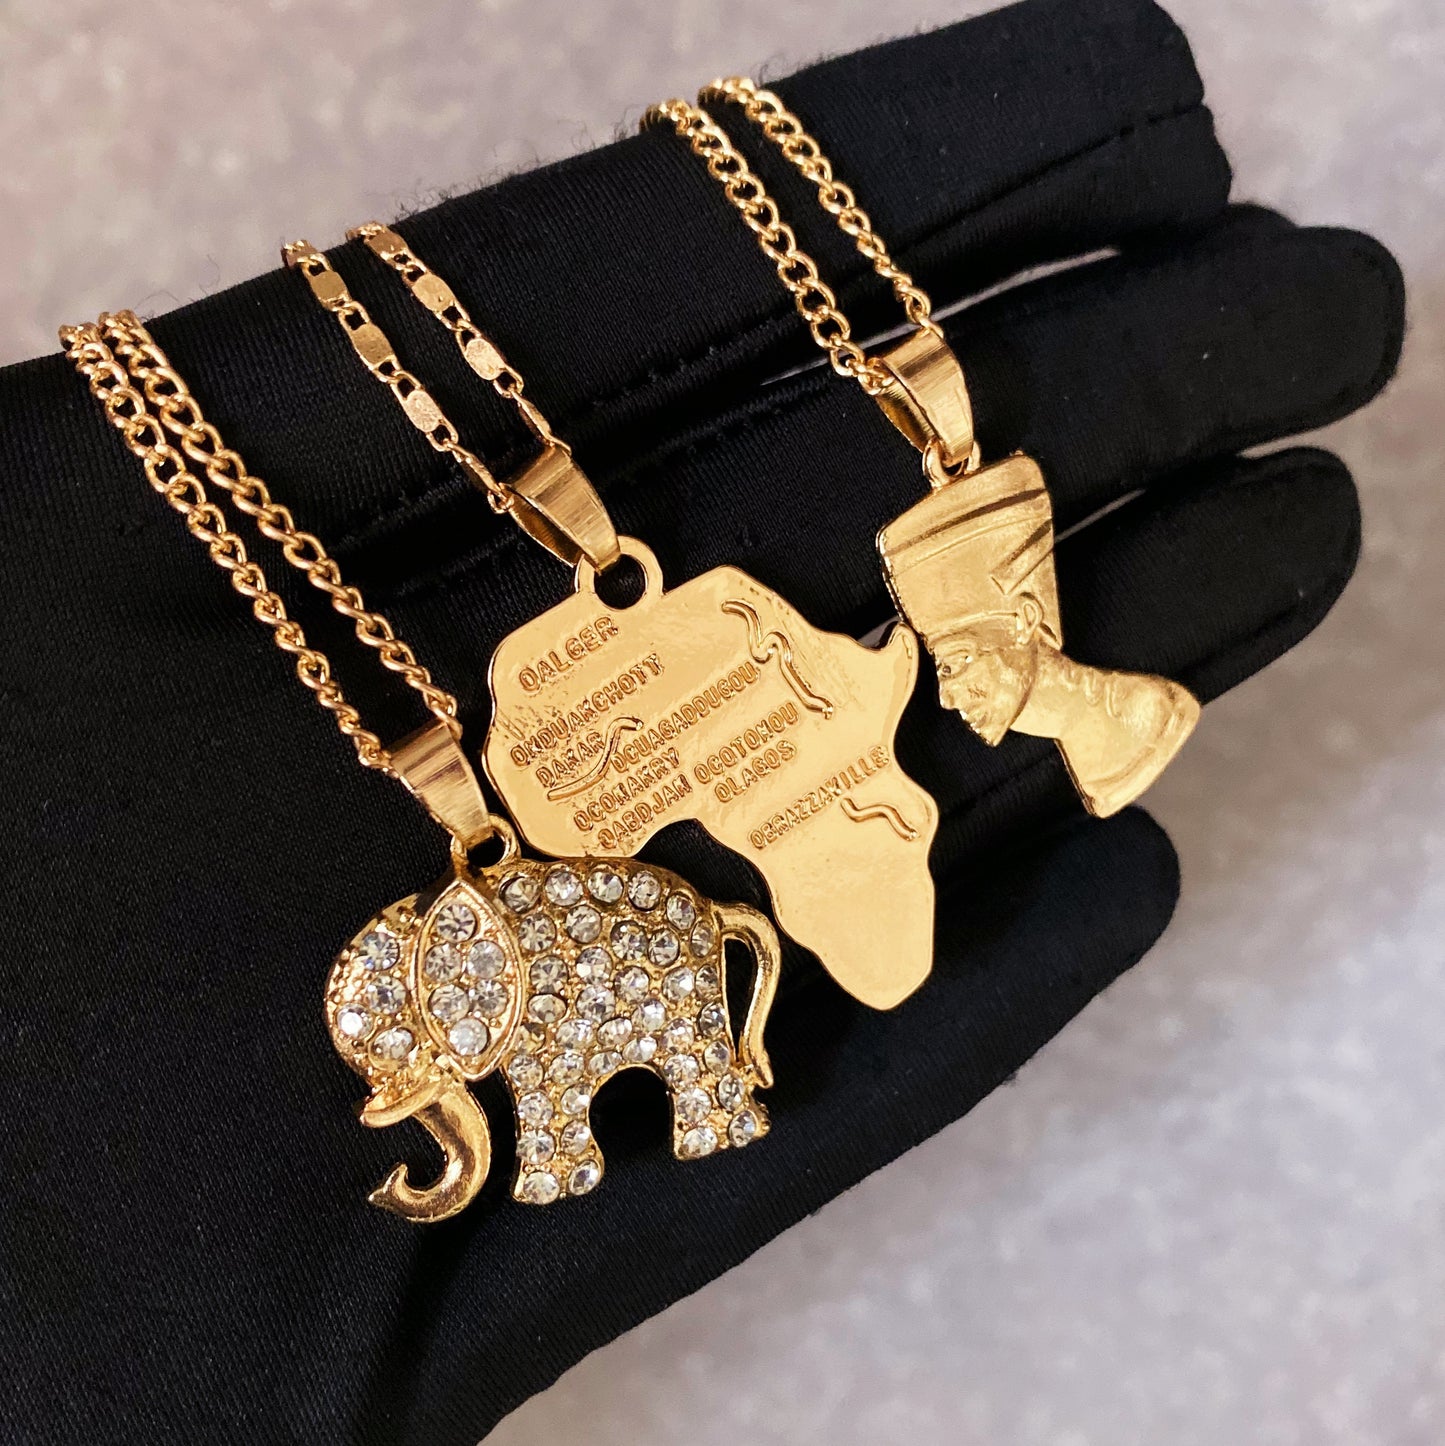 Nefertiti Egyptian Elephant Multi-Layered Map Necklace | High-quality African and Caribbean inspired by Jewellery and accessories | African Jewellery | Caribbean jewellery | Afro-Caribbean accessories | African jewelry